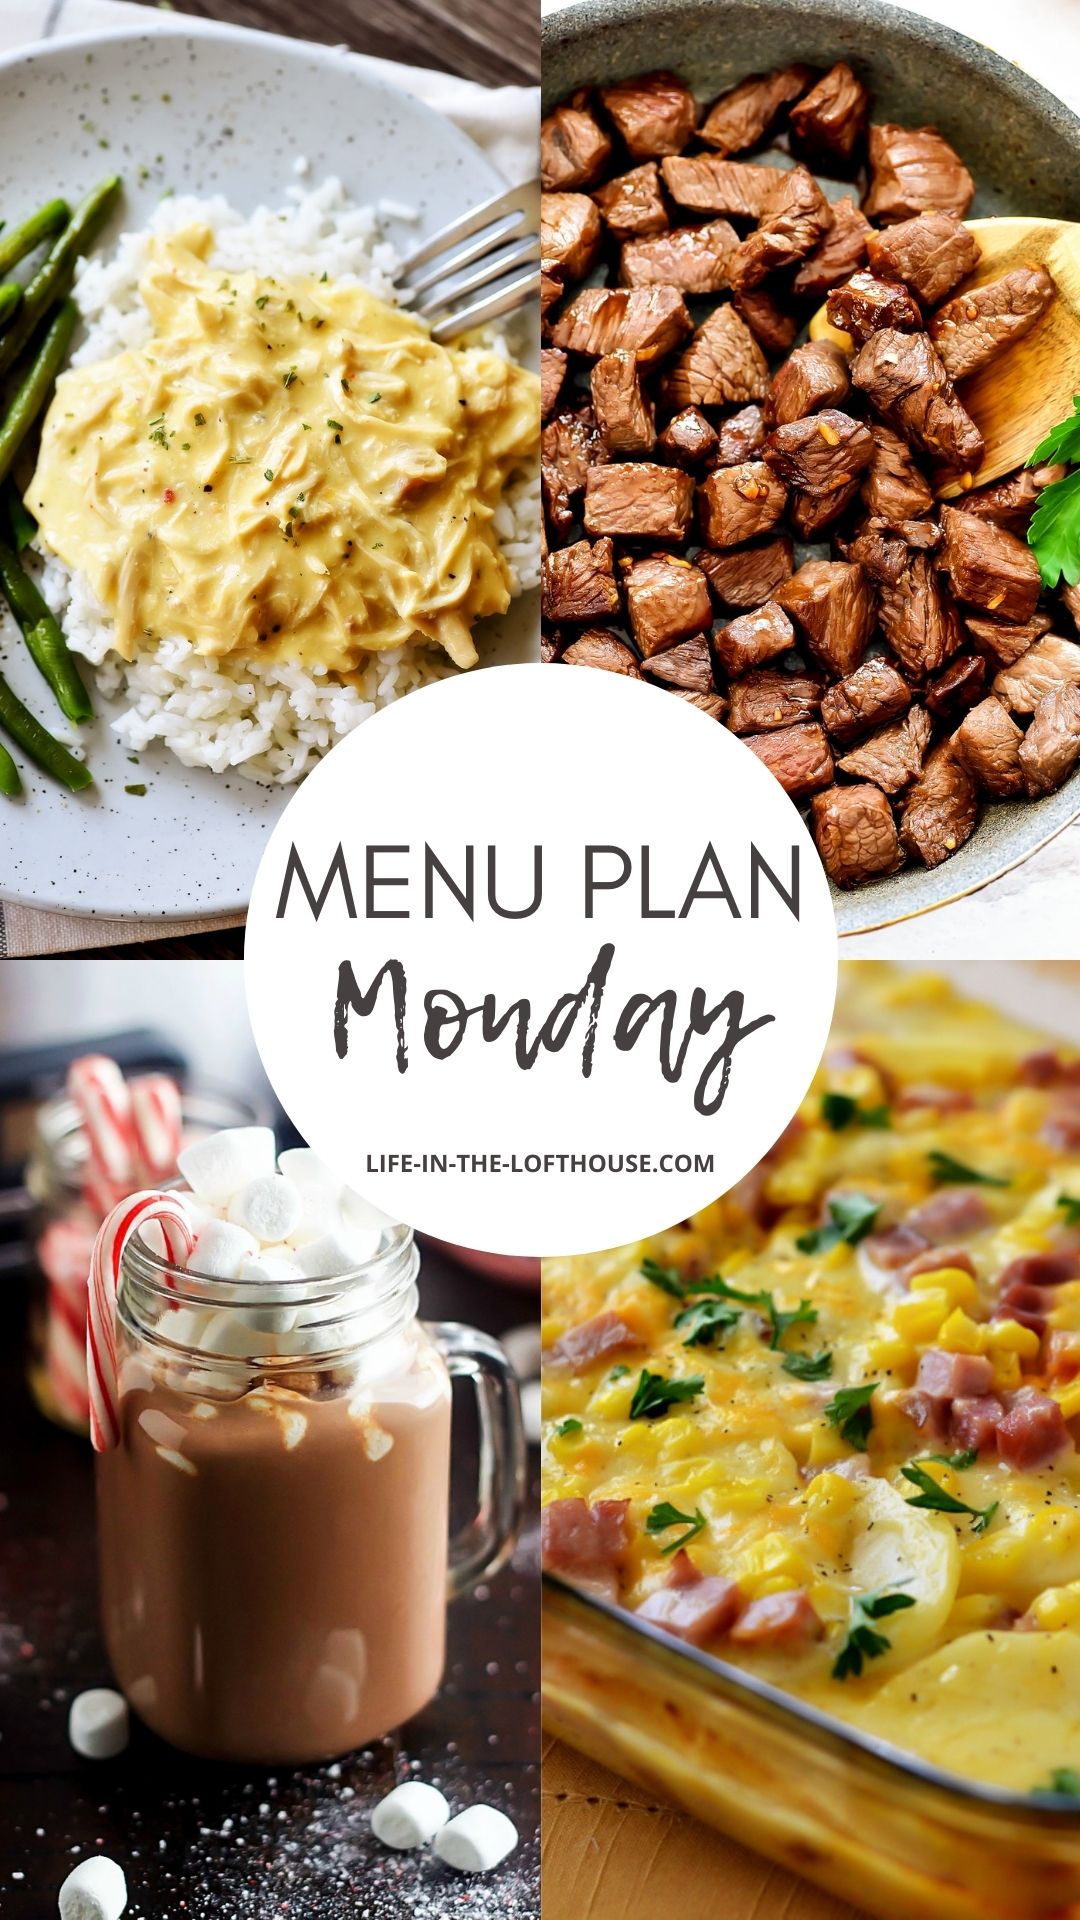 Menu Plan Monday is an easy dinner menu filled with six dinner recipes and one dessert. Life-in-the-Lofthouse.com